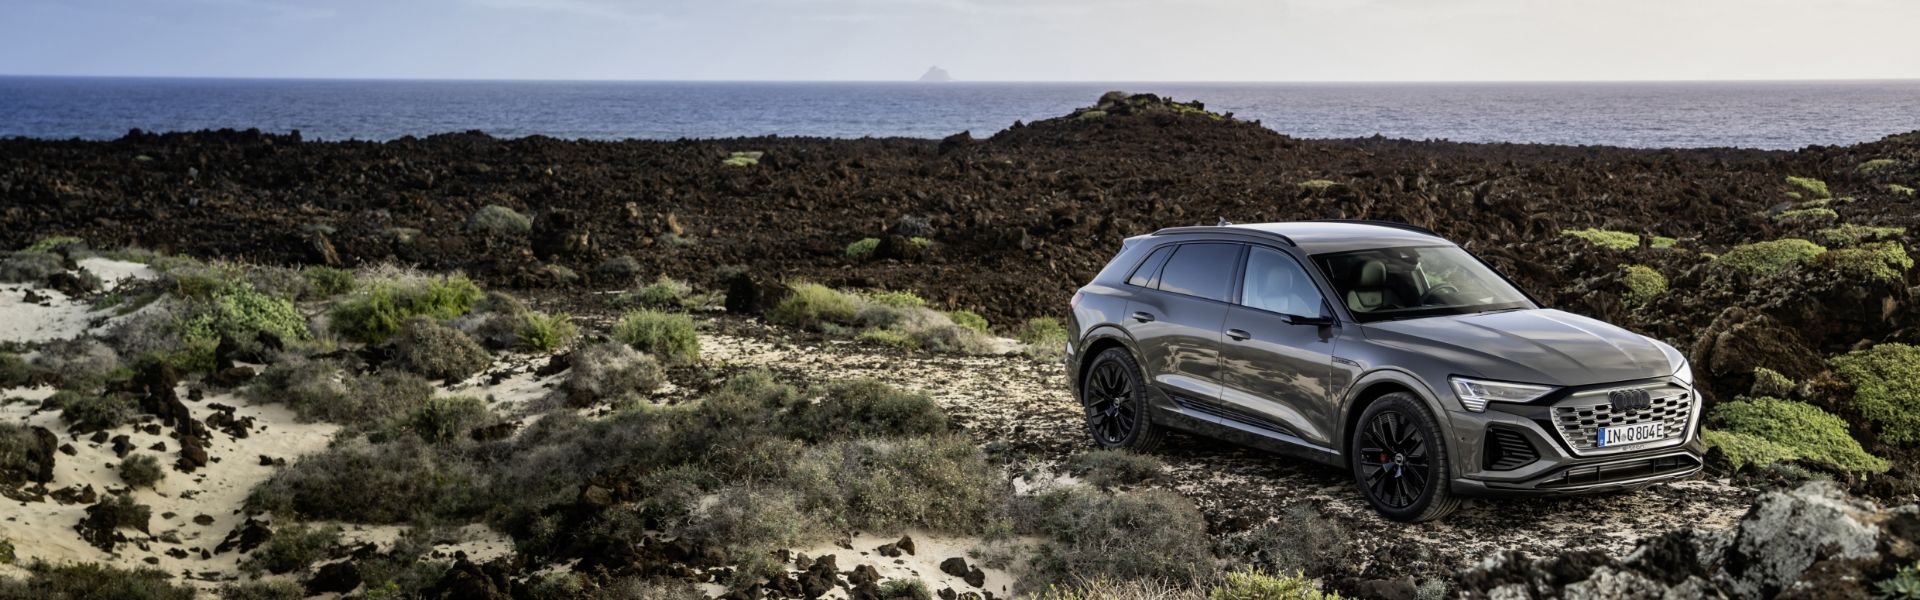 Audi Q8 e-tron on top of a hill with green plants